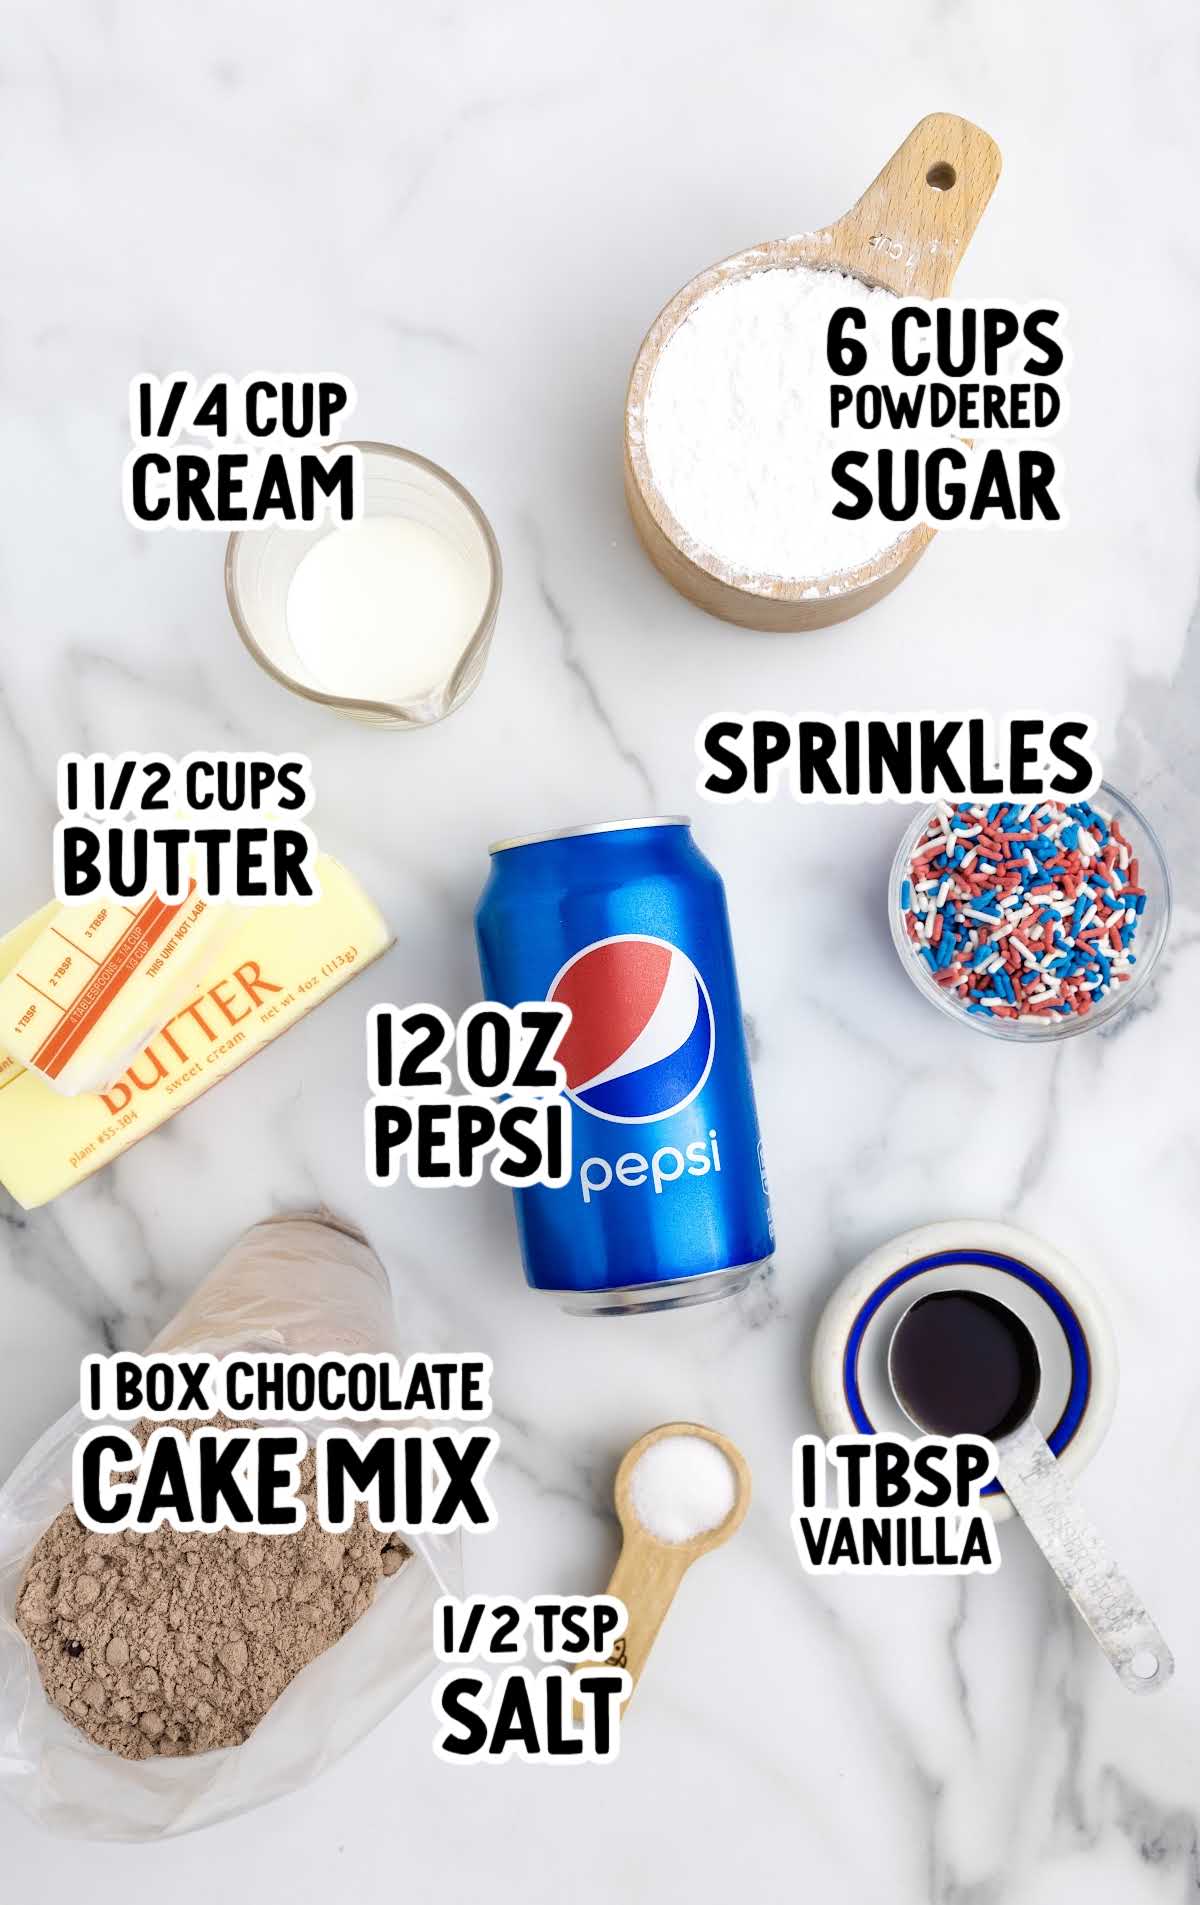 Pepsi cupcakes raw ingredients that are labeled